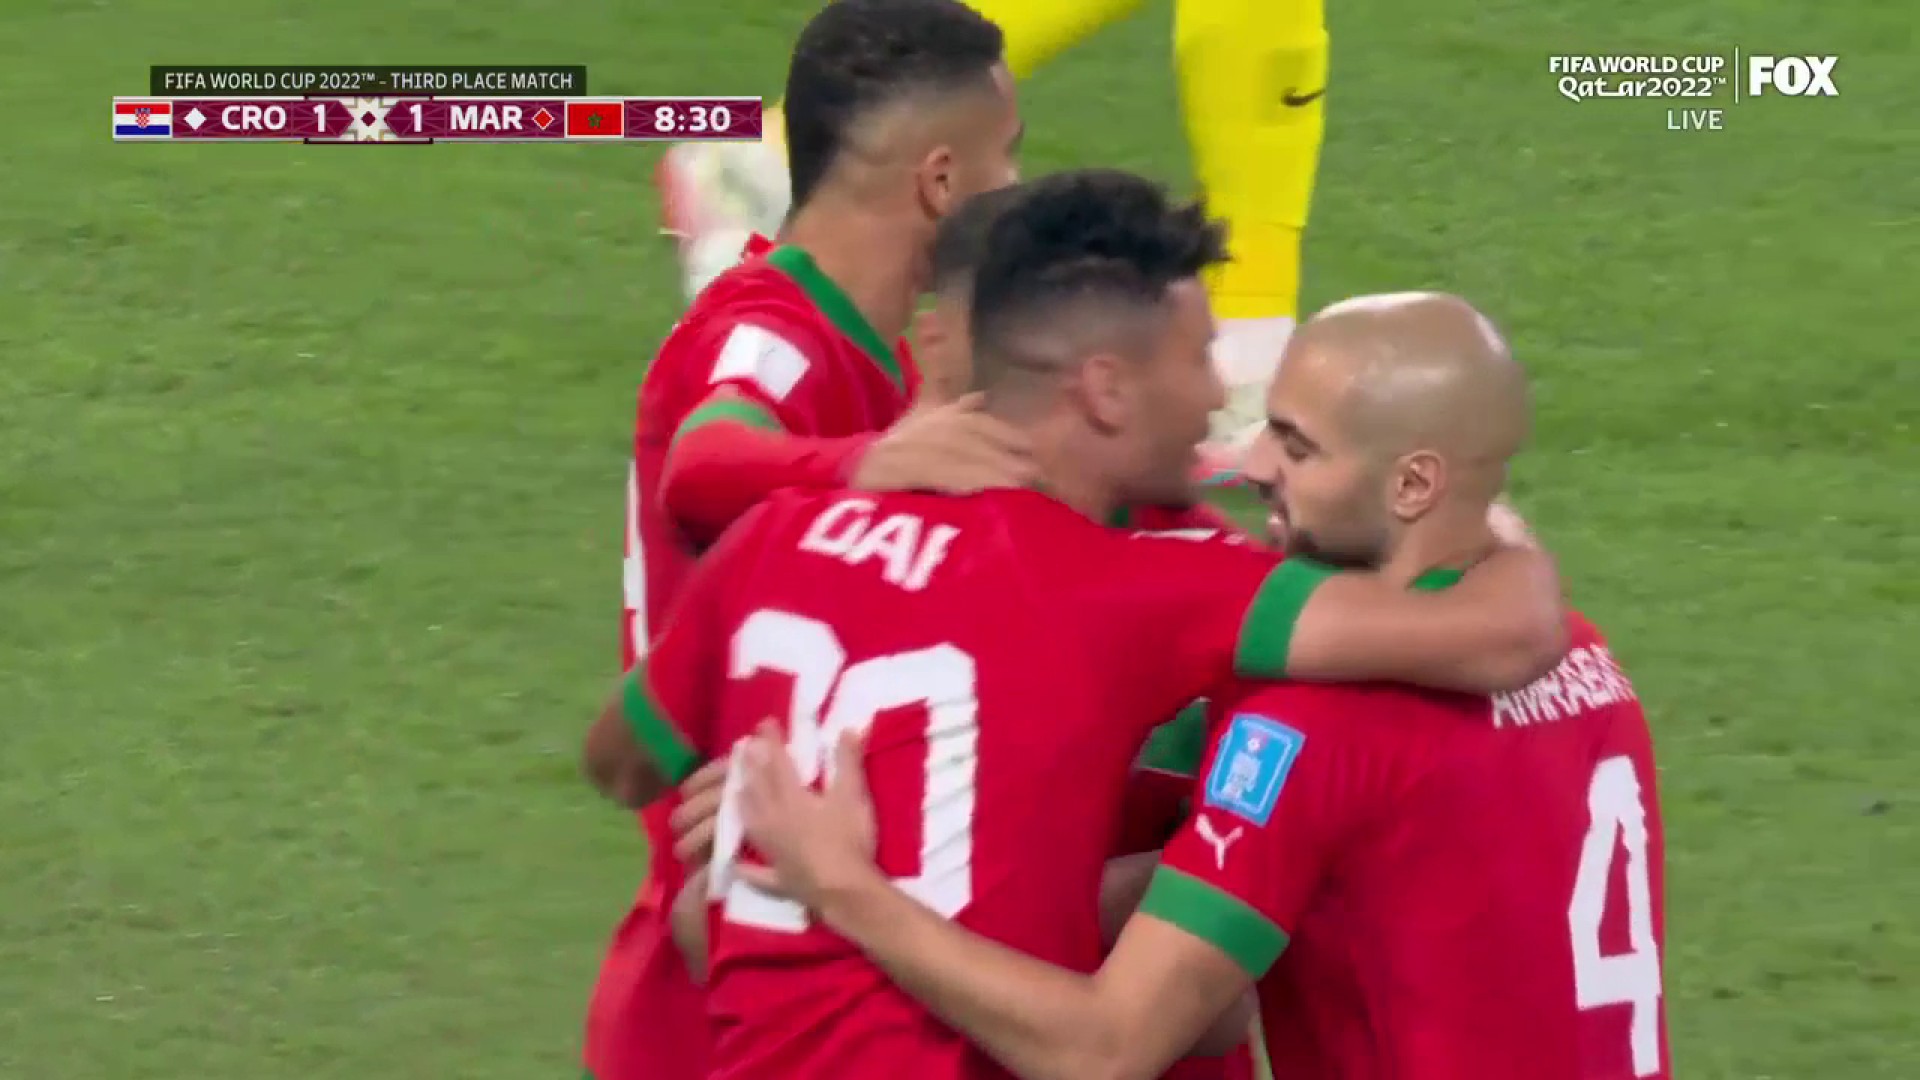 AND JUST LIKE THAT MOROCCO TIES IT 😱

What a start to this game 🔥”